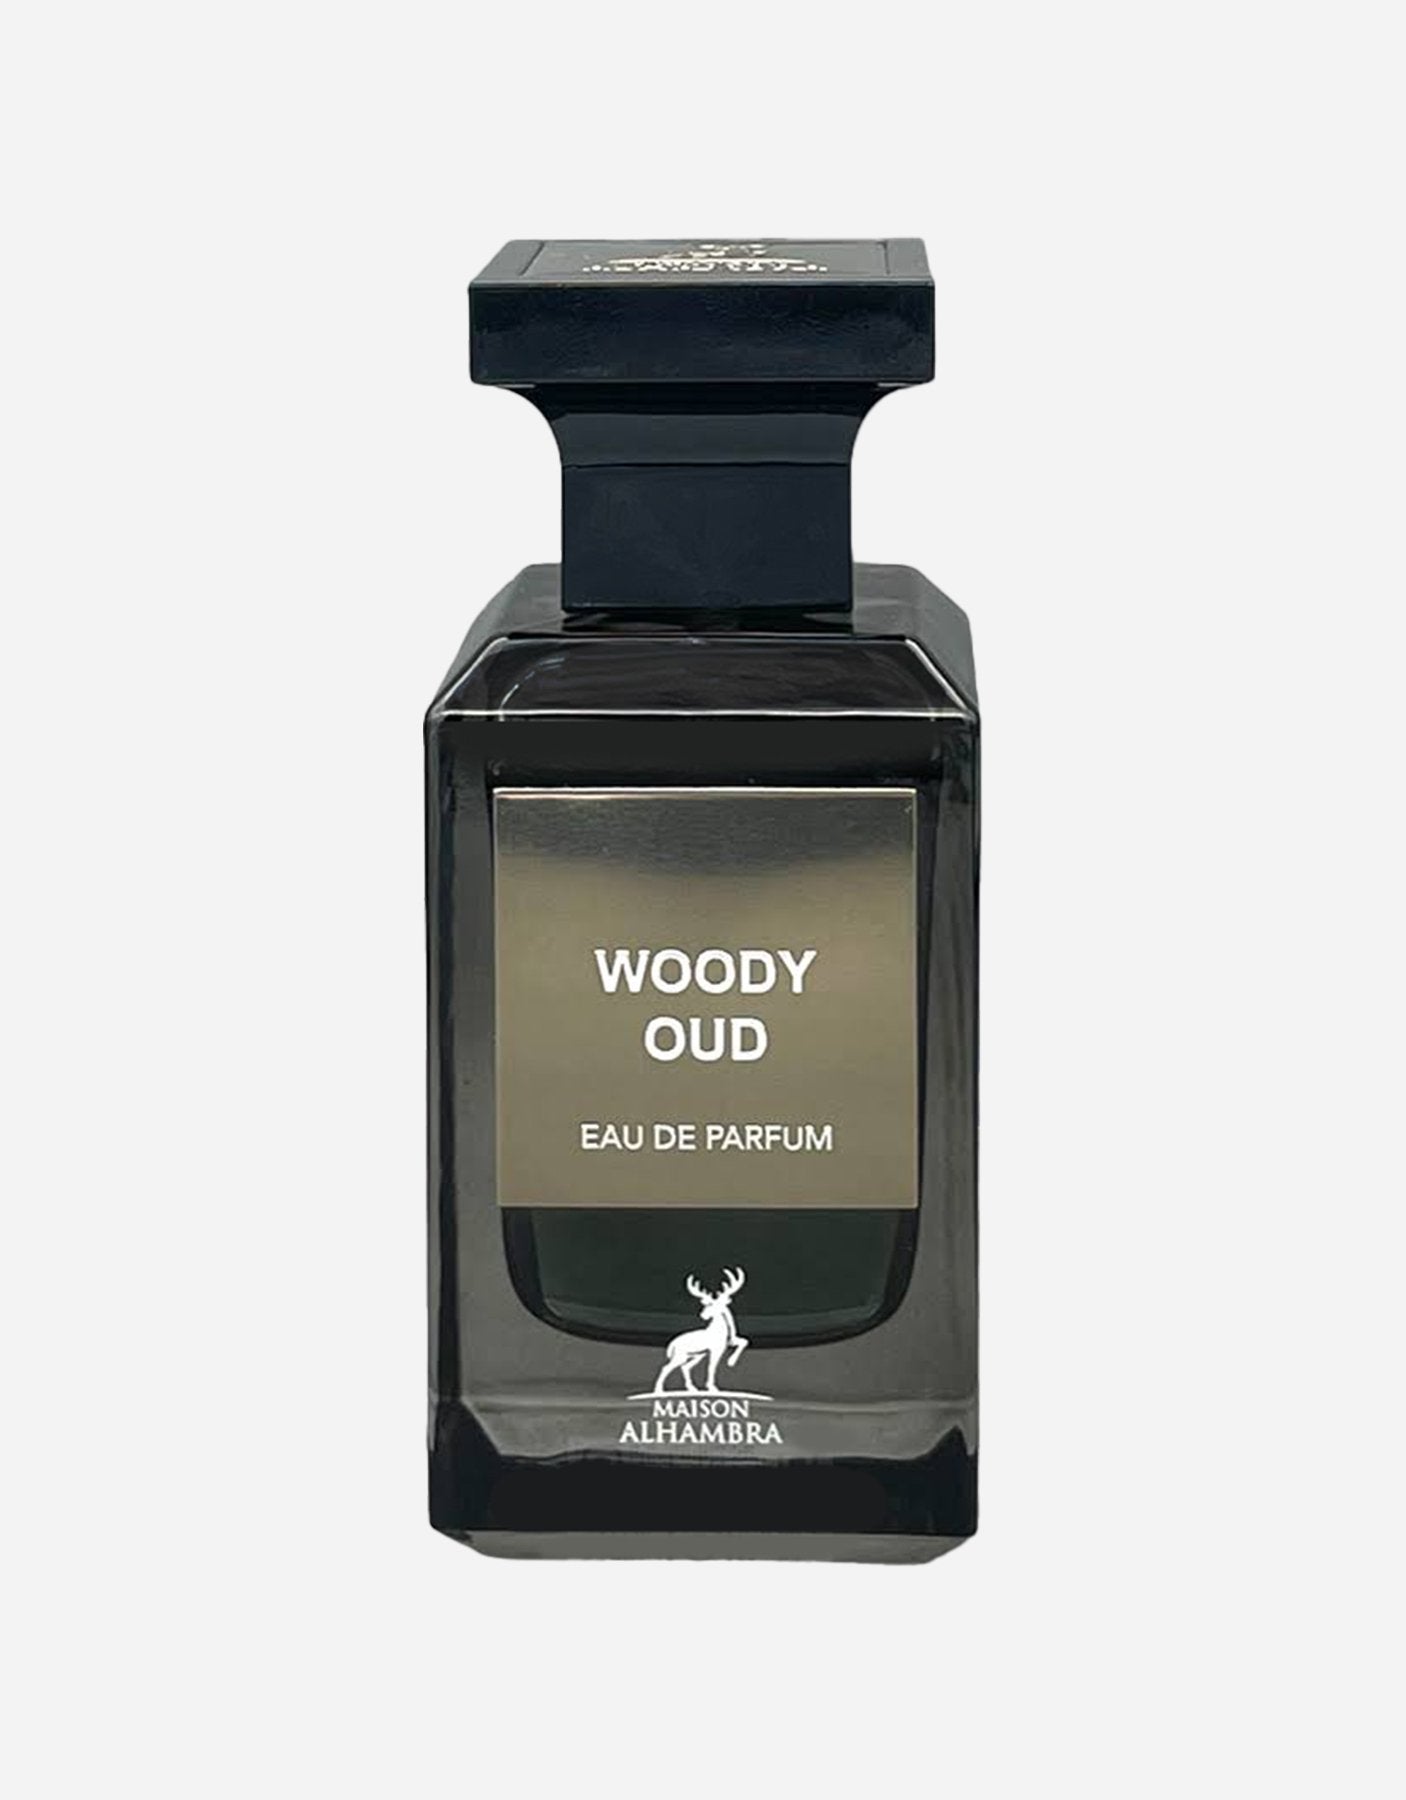 Woody Oud Unisex Perfume by Maison Alhambra | All Arabic